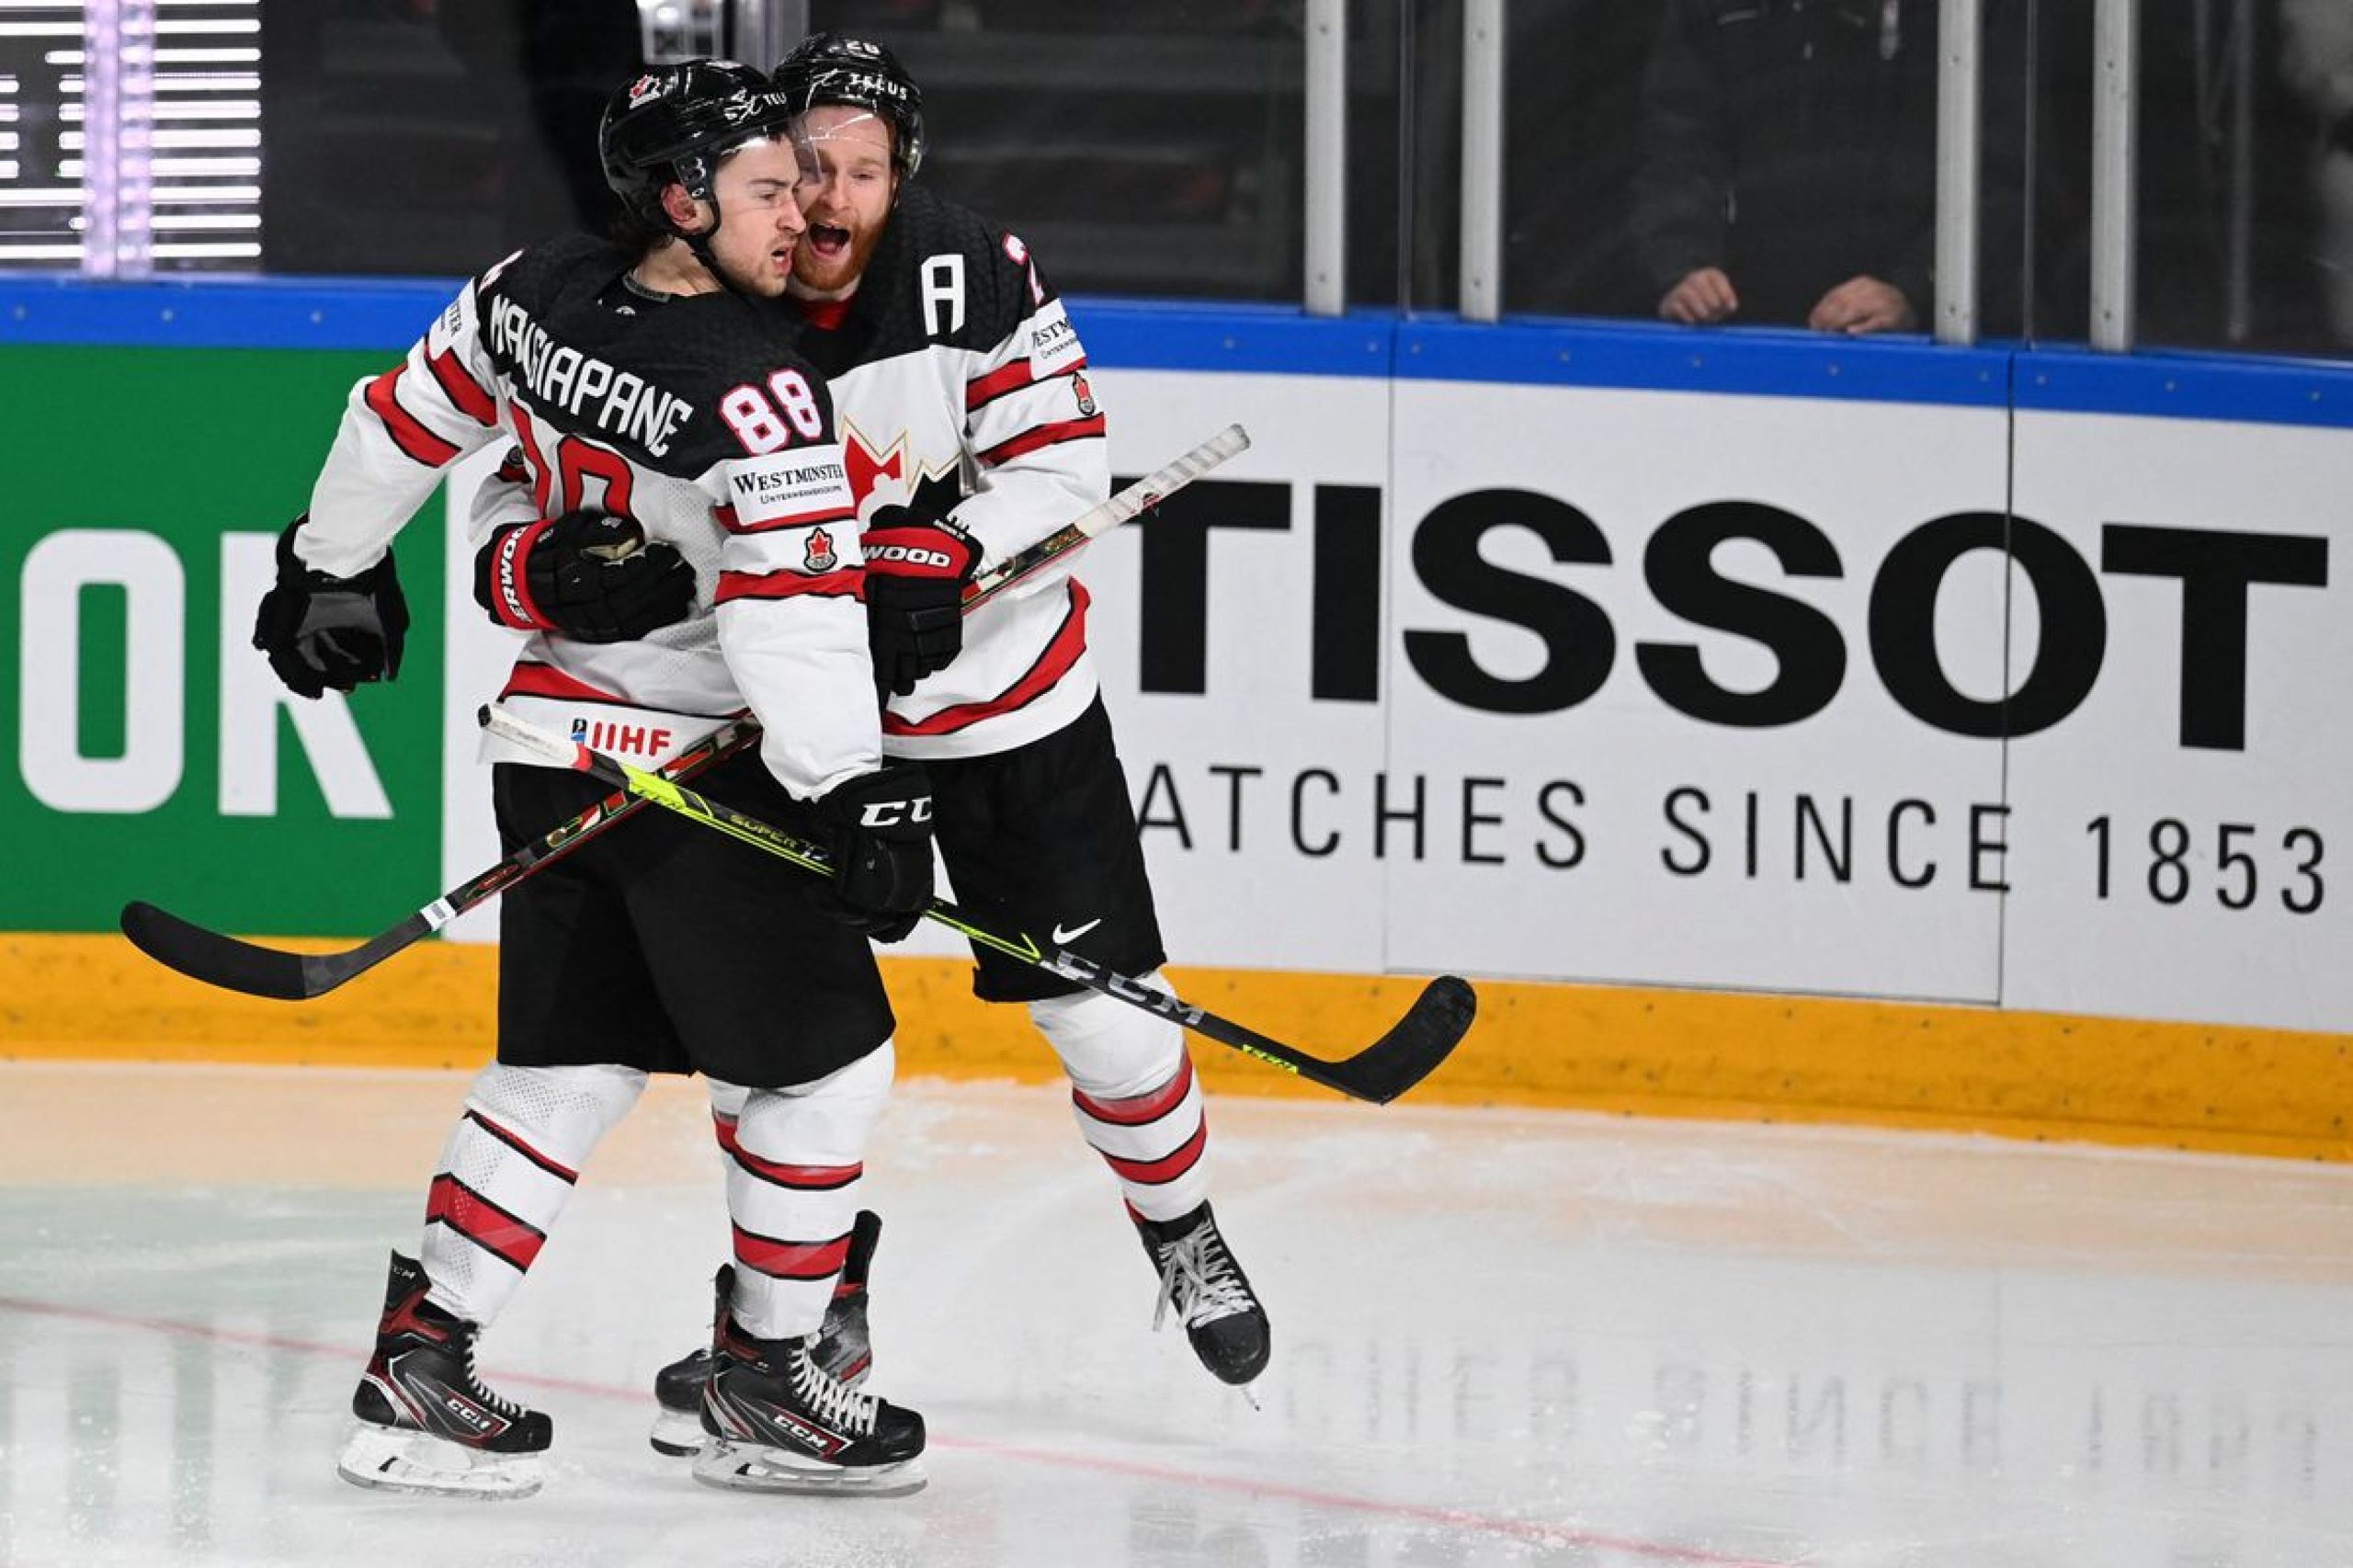 Canada earns spot in world hockey championship final with 4-2 win over U.S.